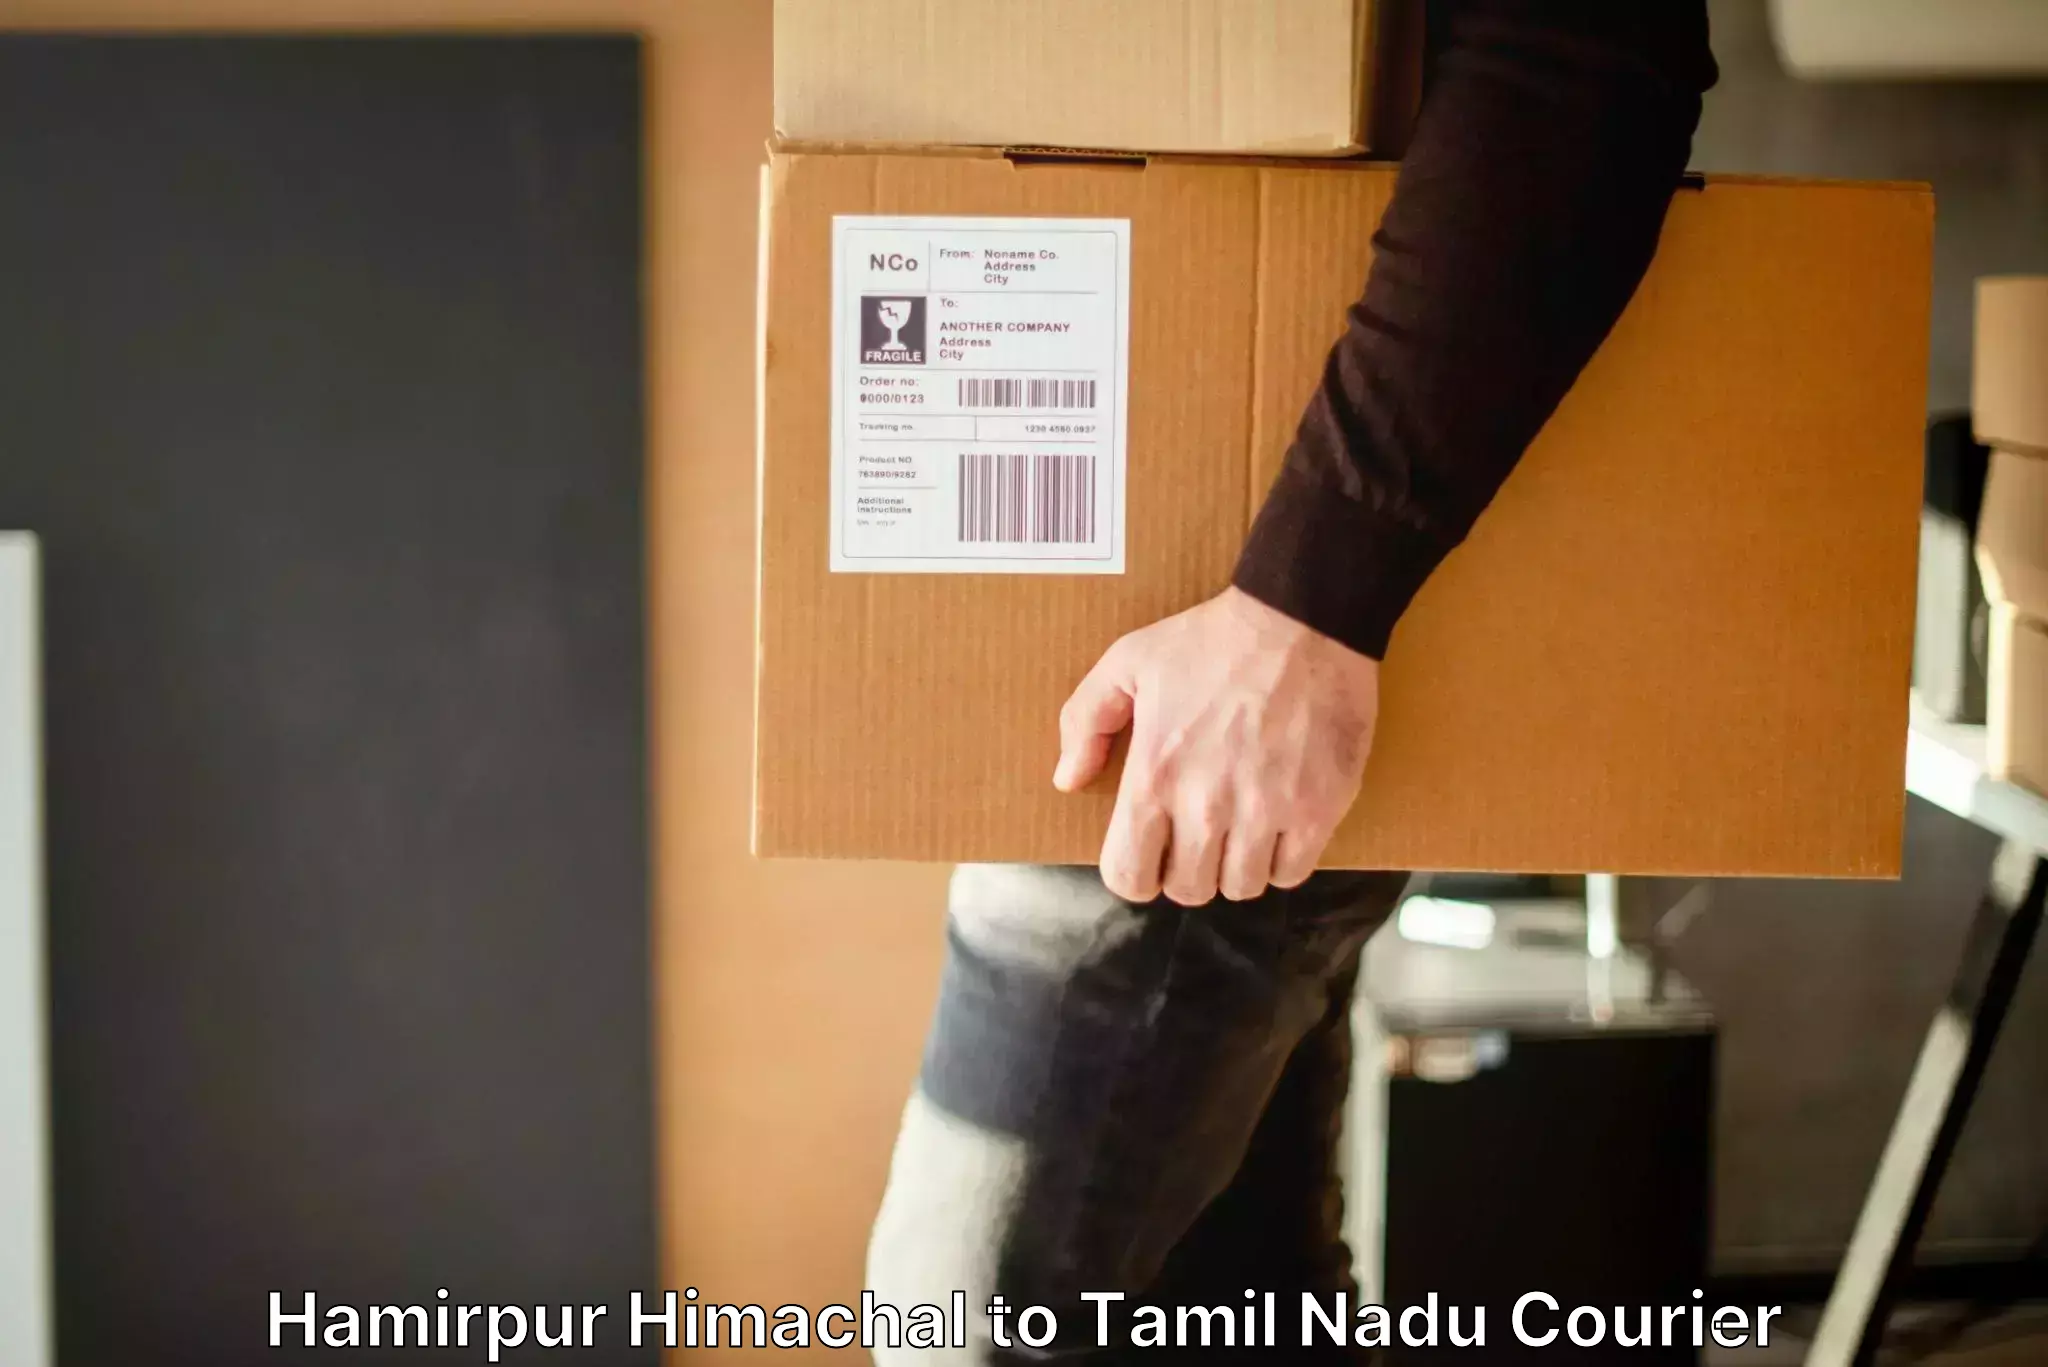 Scheduled baggage courier Hamirpur Himachal to Ennore Port Chennai